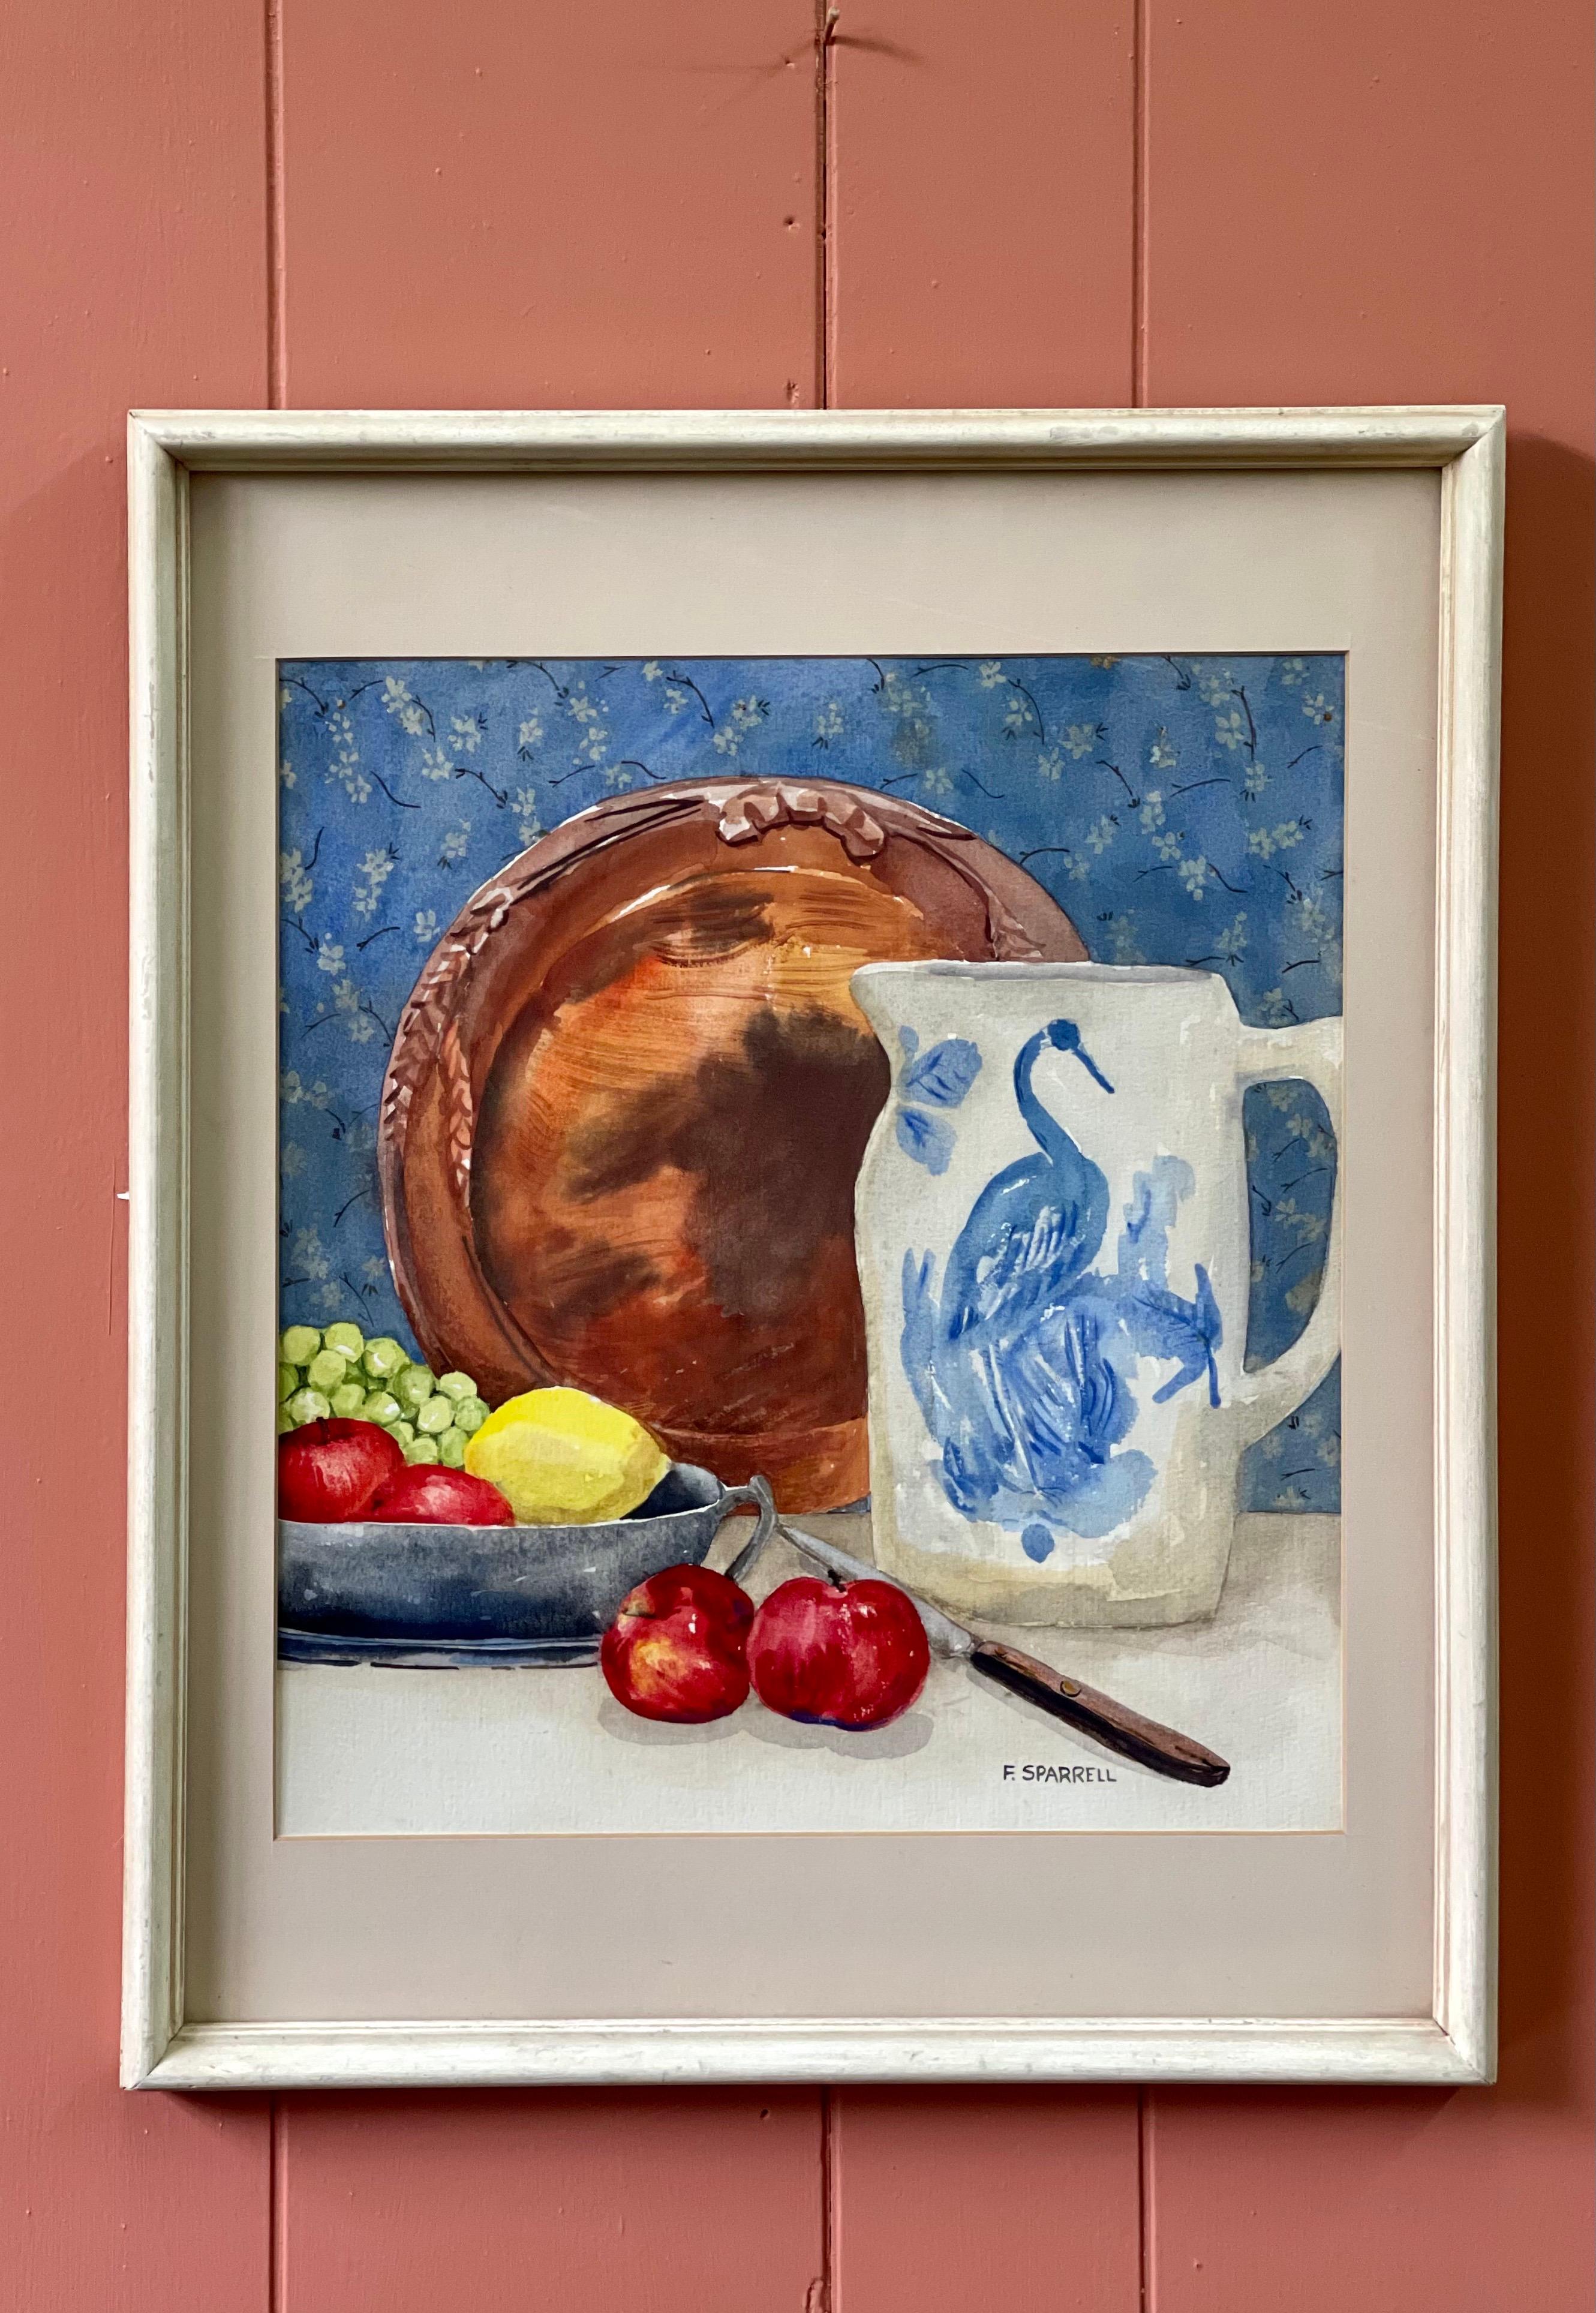 A beautifully composed still life watercolor of blue and white petite floral print wallpaper in the background layered with a copper plate, blue and white porcelain pitcher decorated with a crane, and a pewter bowl of fruit in the foreground. The